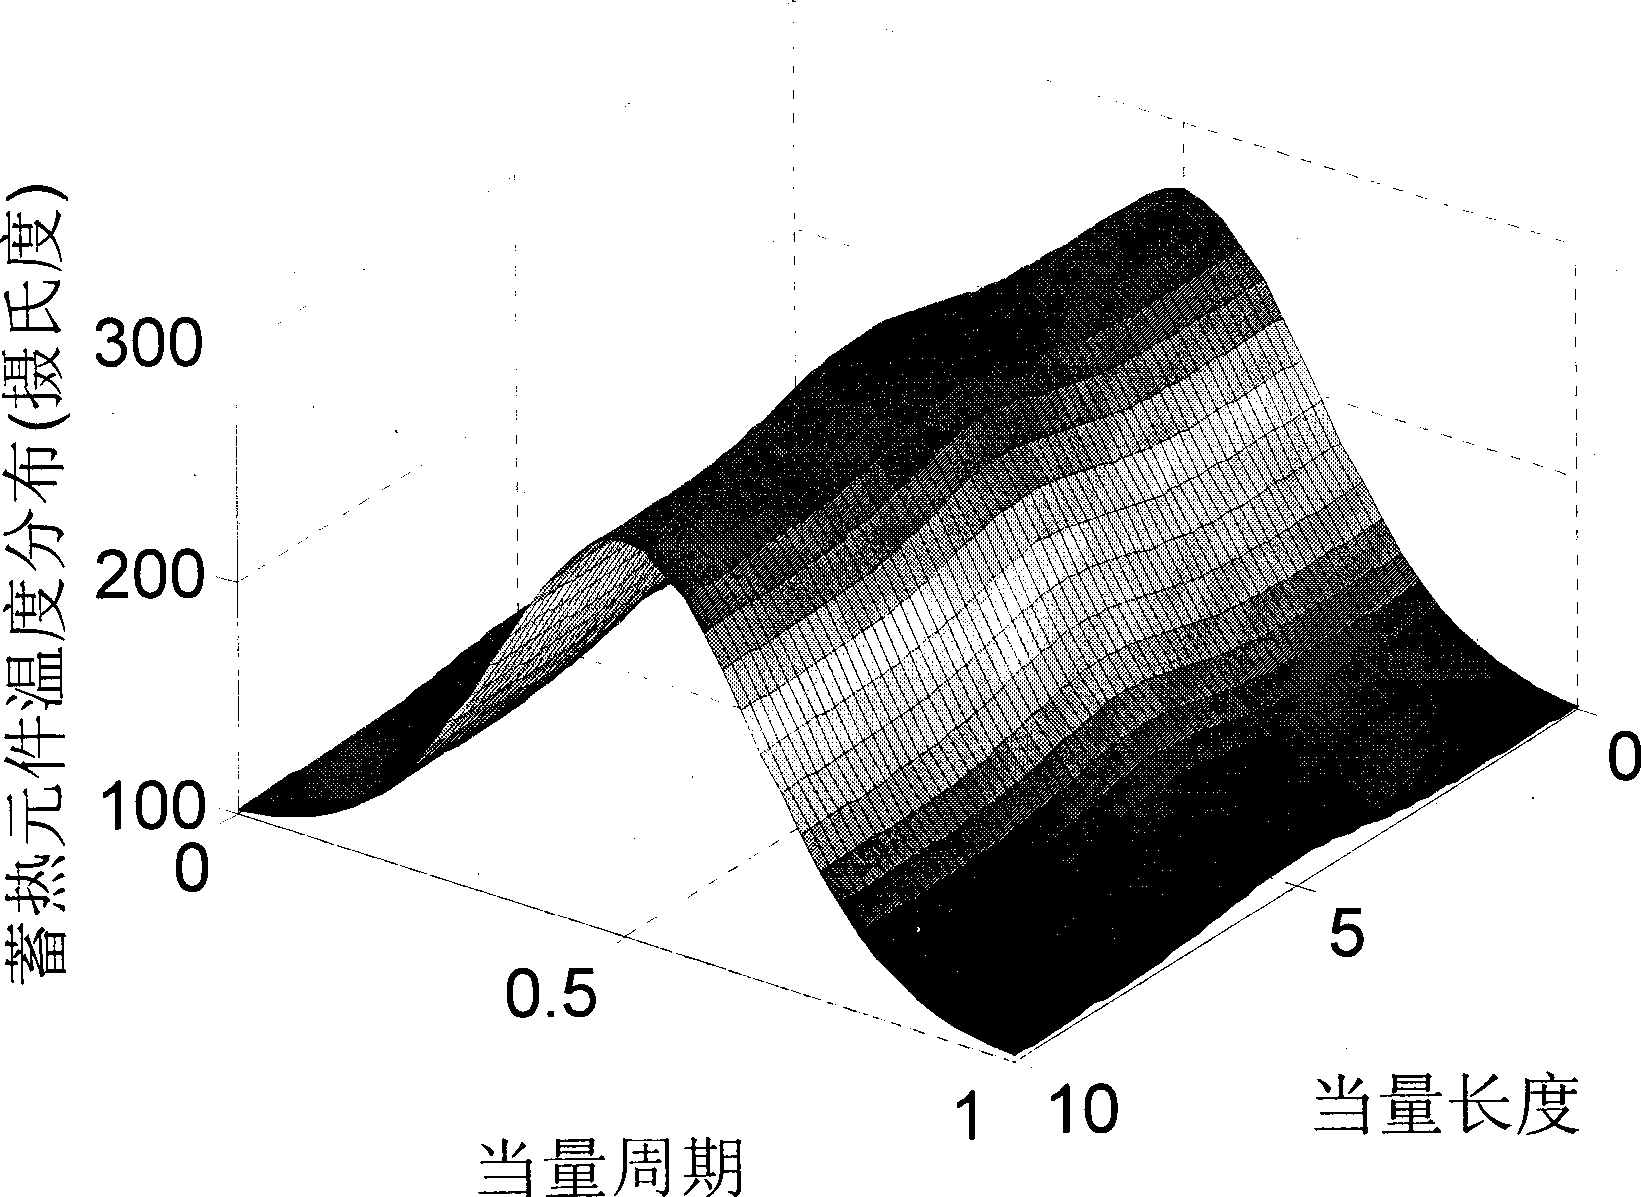 Station boiler air preheater hot spot detecting method based on analog computation of rotor temperature field